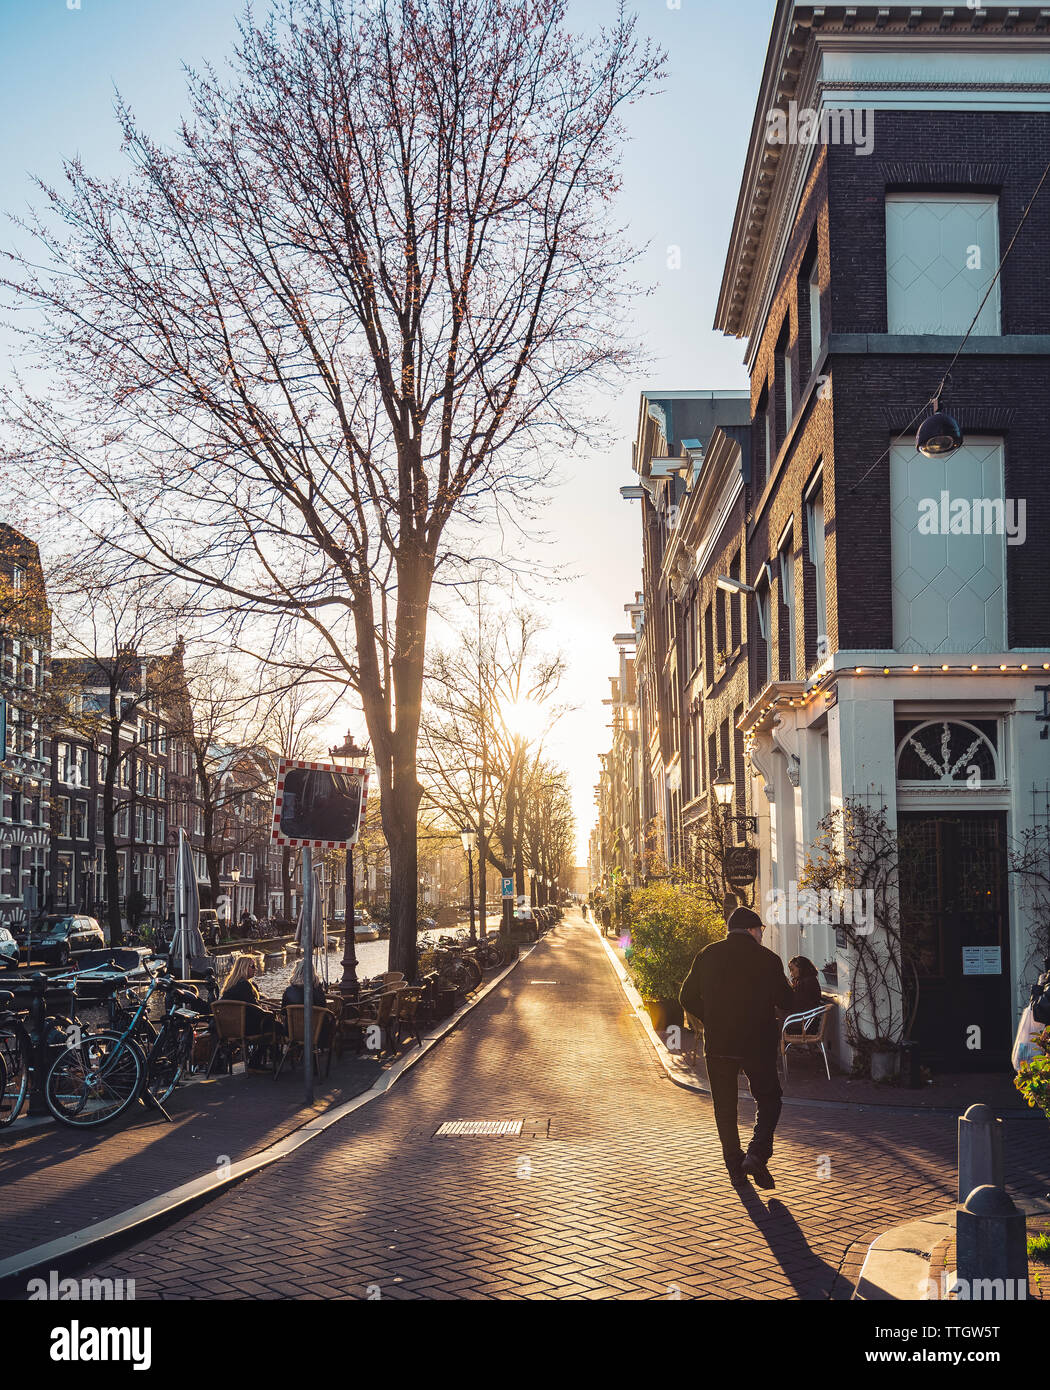 Sun setting over old town of Amsterdam. Stock Photo